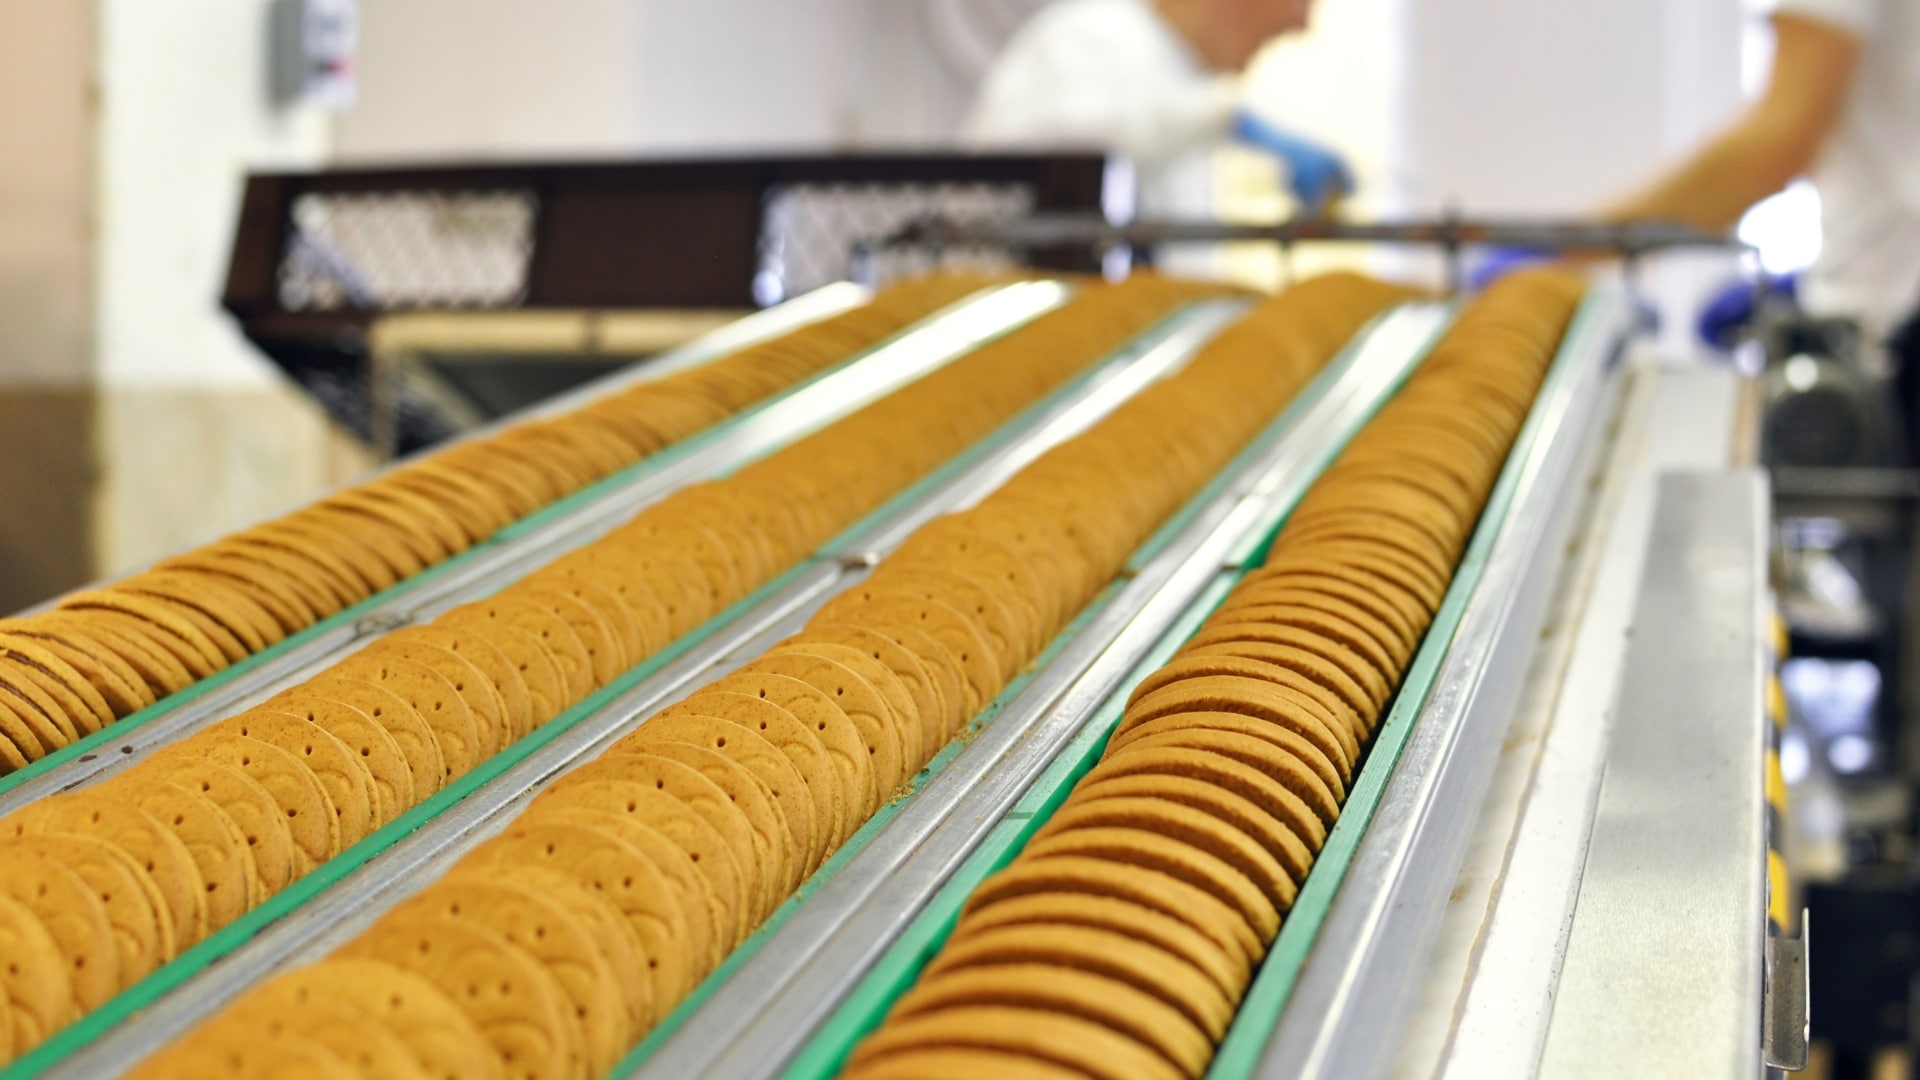 biscuit production